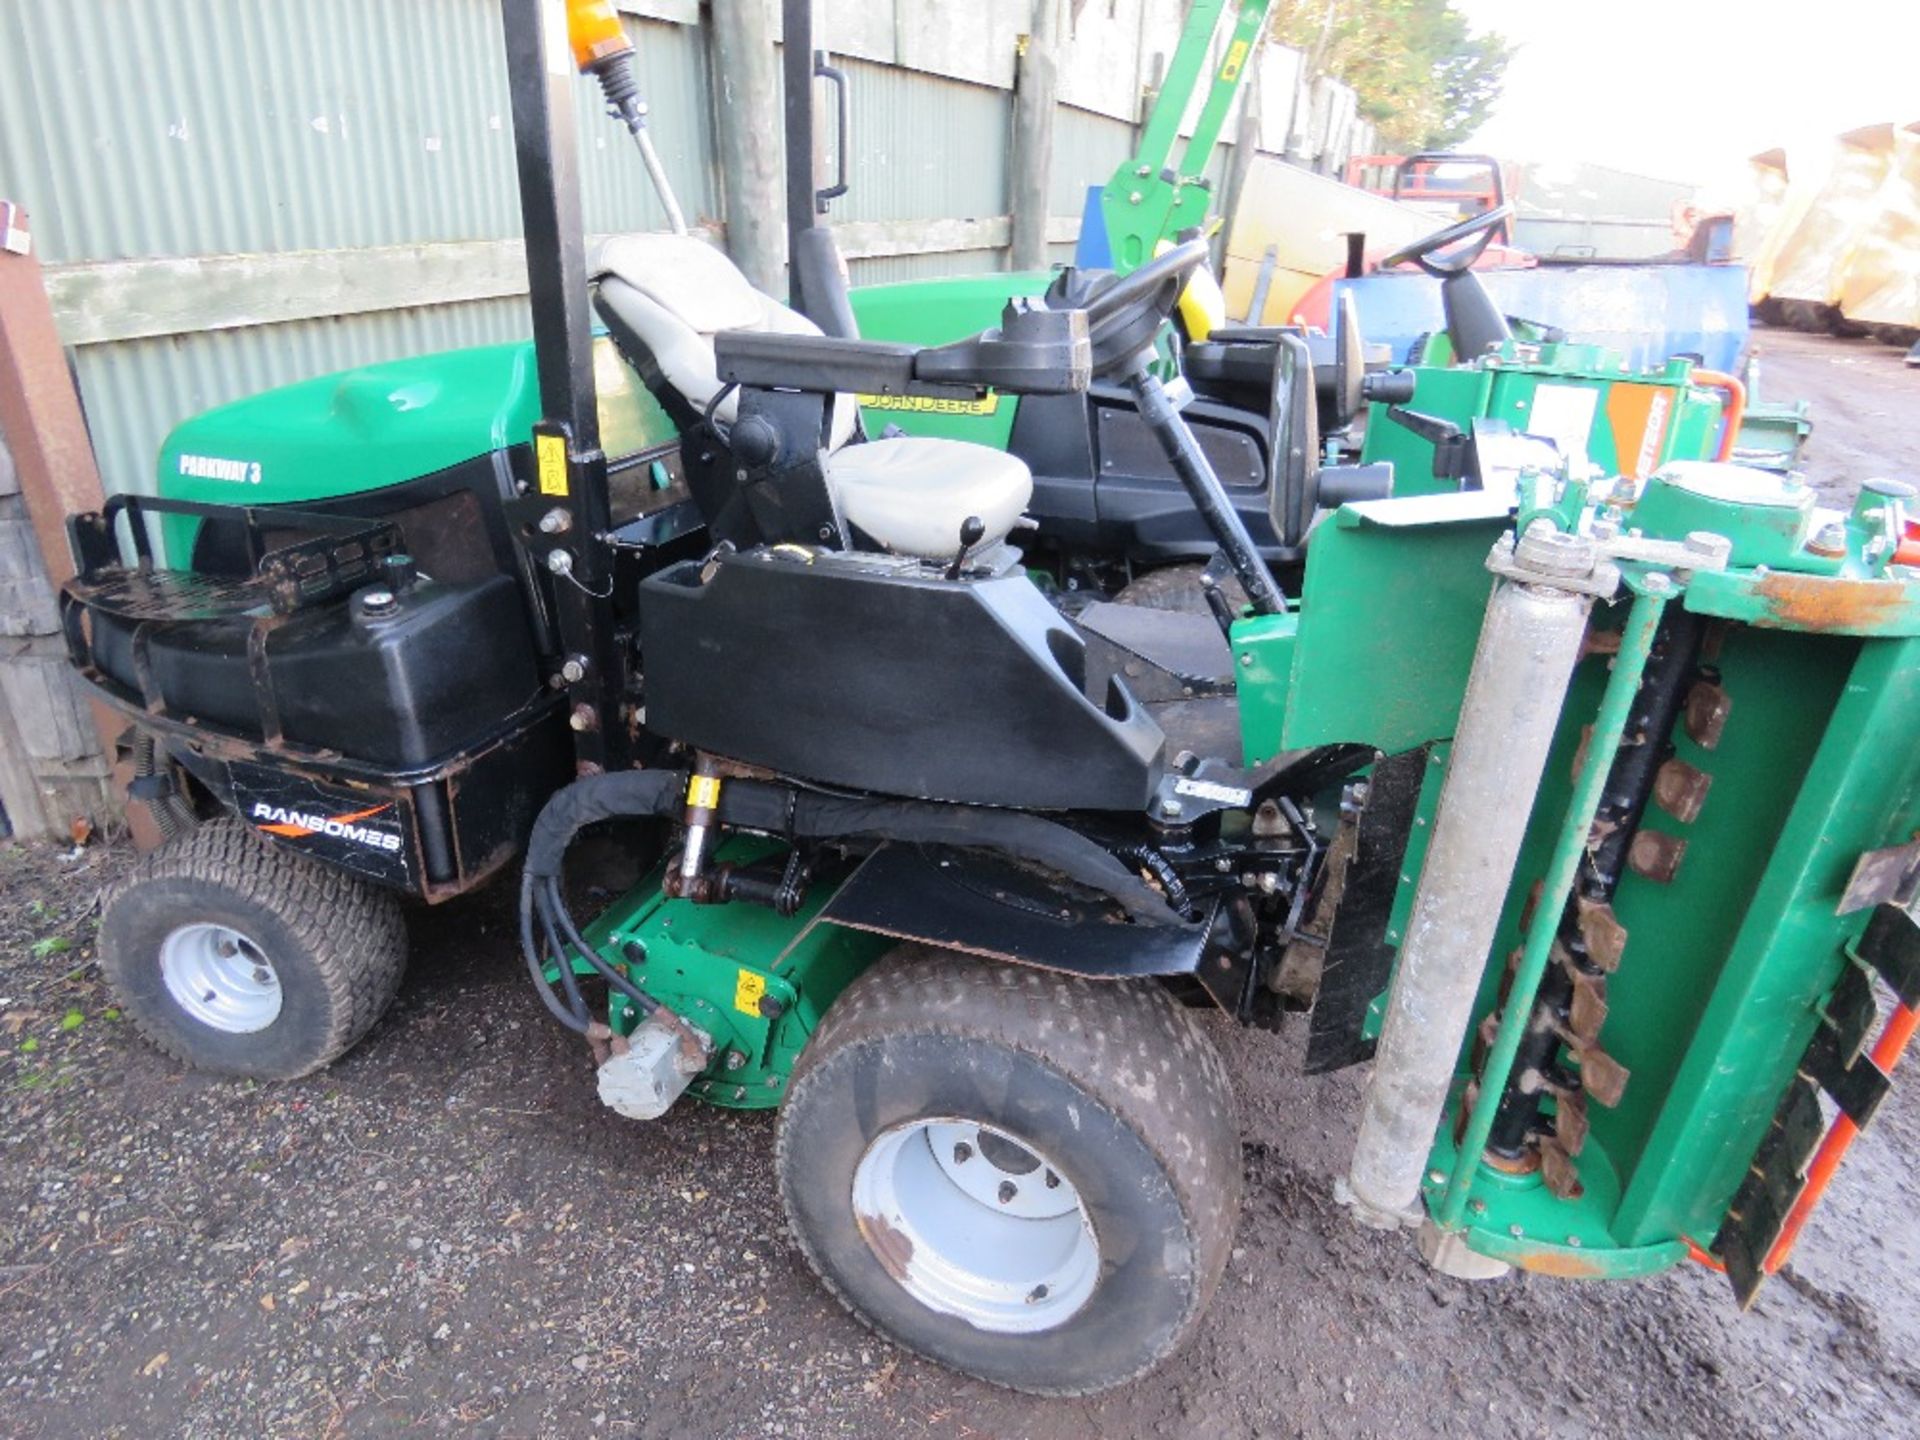 RANSOMES PARWAY 3 TRIPLE RIDE ON MOWER WITH METEOR FLAIL HEADS REG: NX18 BJE WITH V5. PREVIOUS COUNC - Image 2 of 10